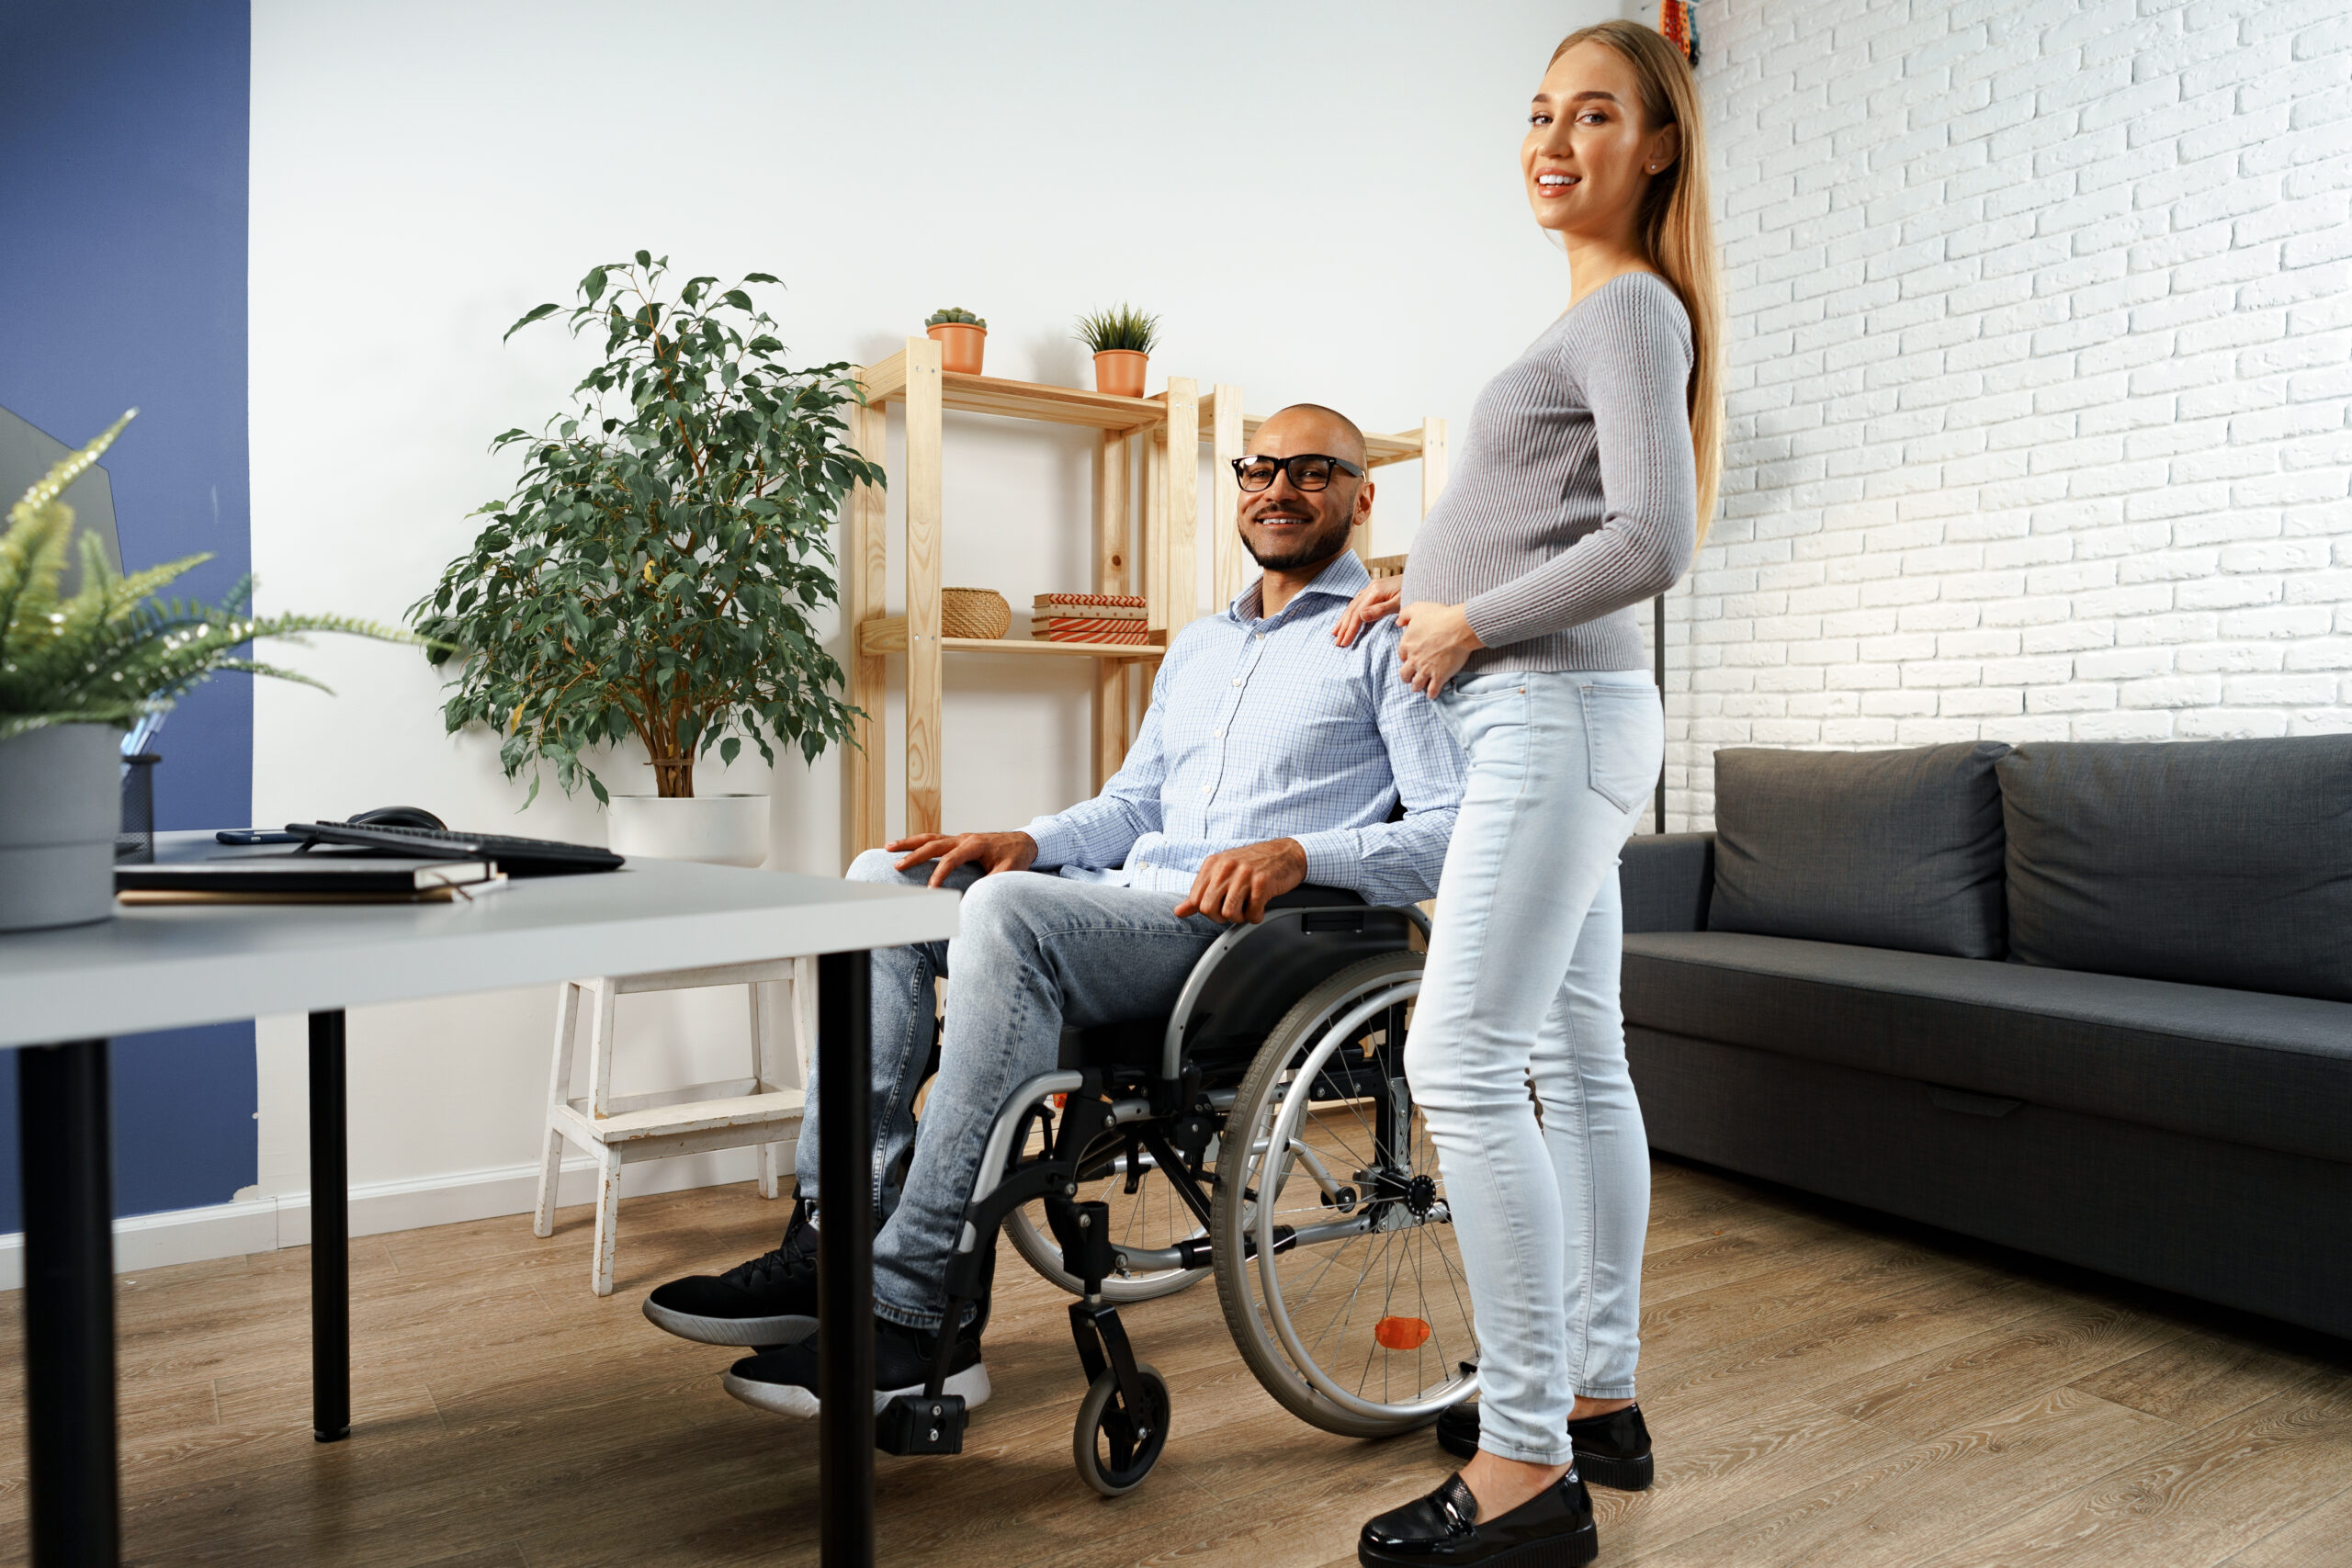 Pregnant woman holding a hand of her disabled husband sitting in a wheelchair, indoors